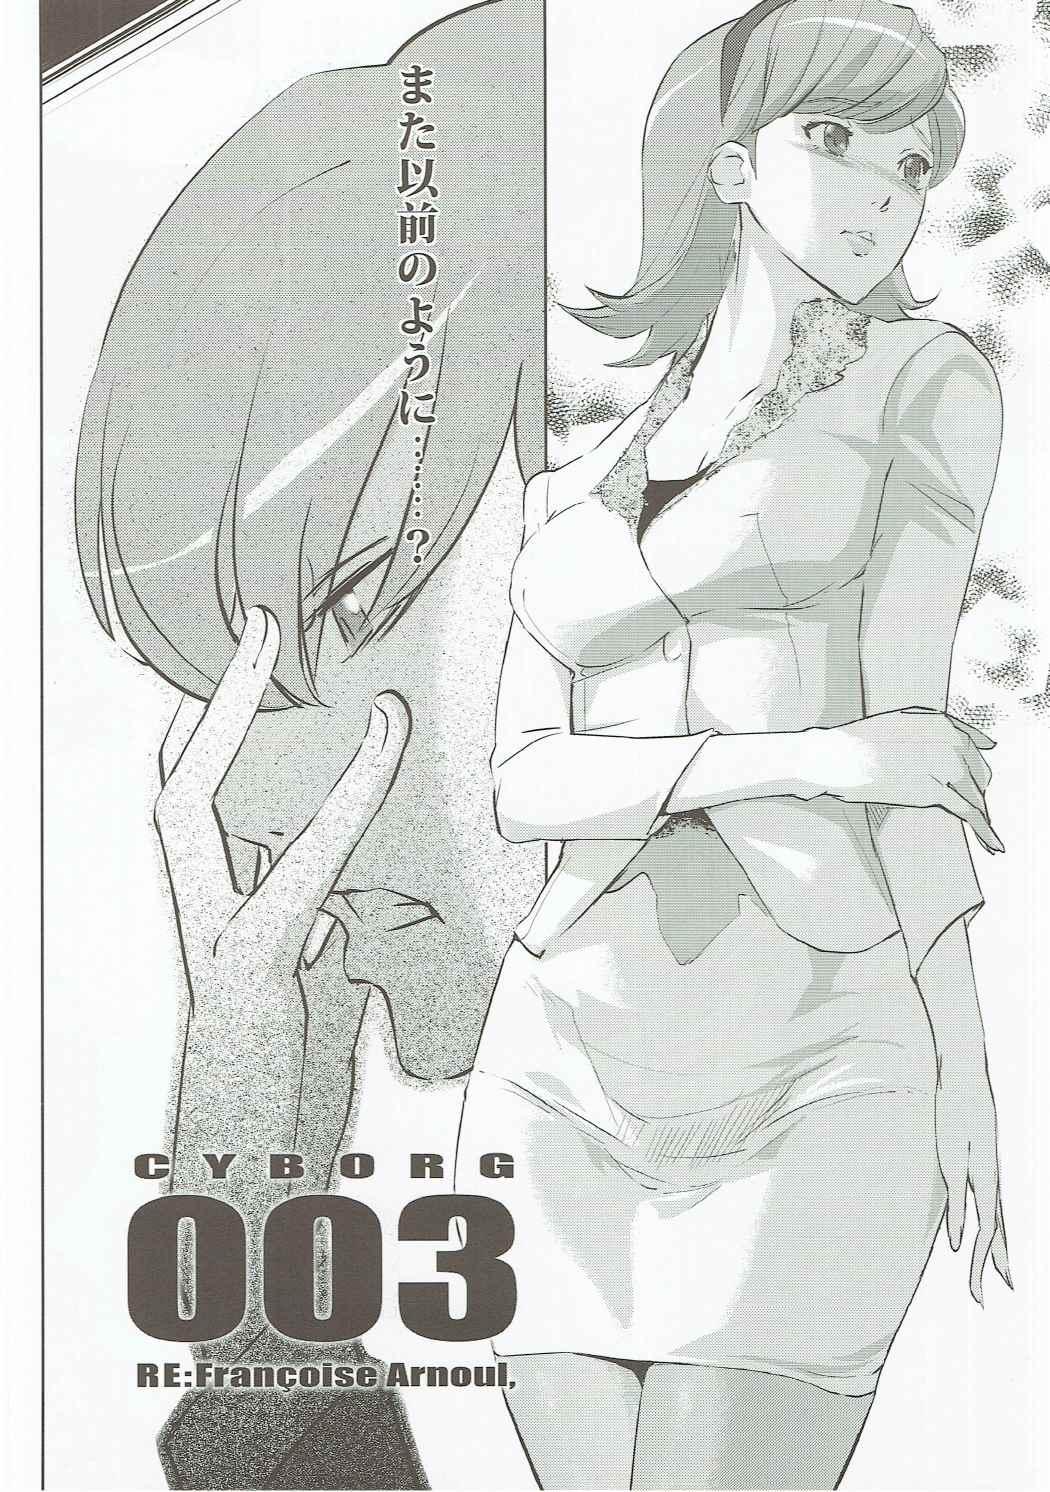 Perfect Teen RE:Francoise Arnoul - Cyborg 009 Friends - Page 3